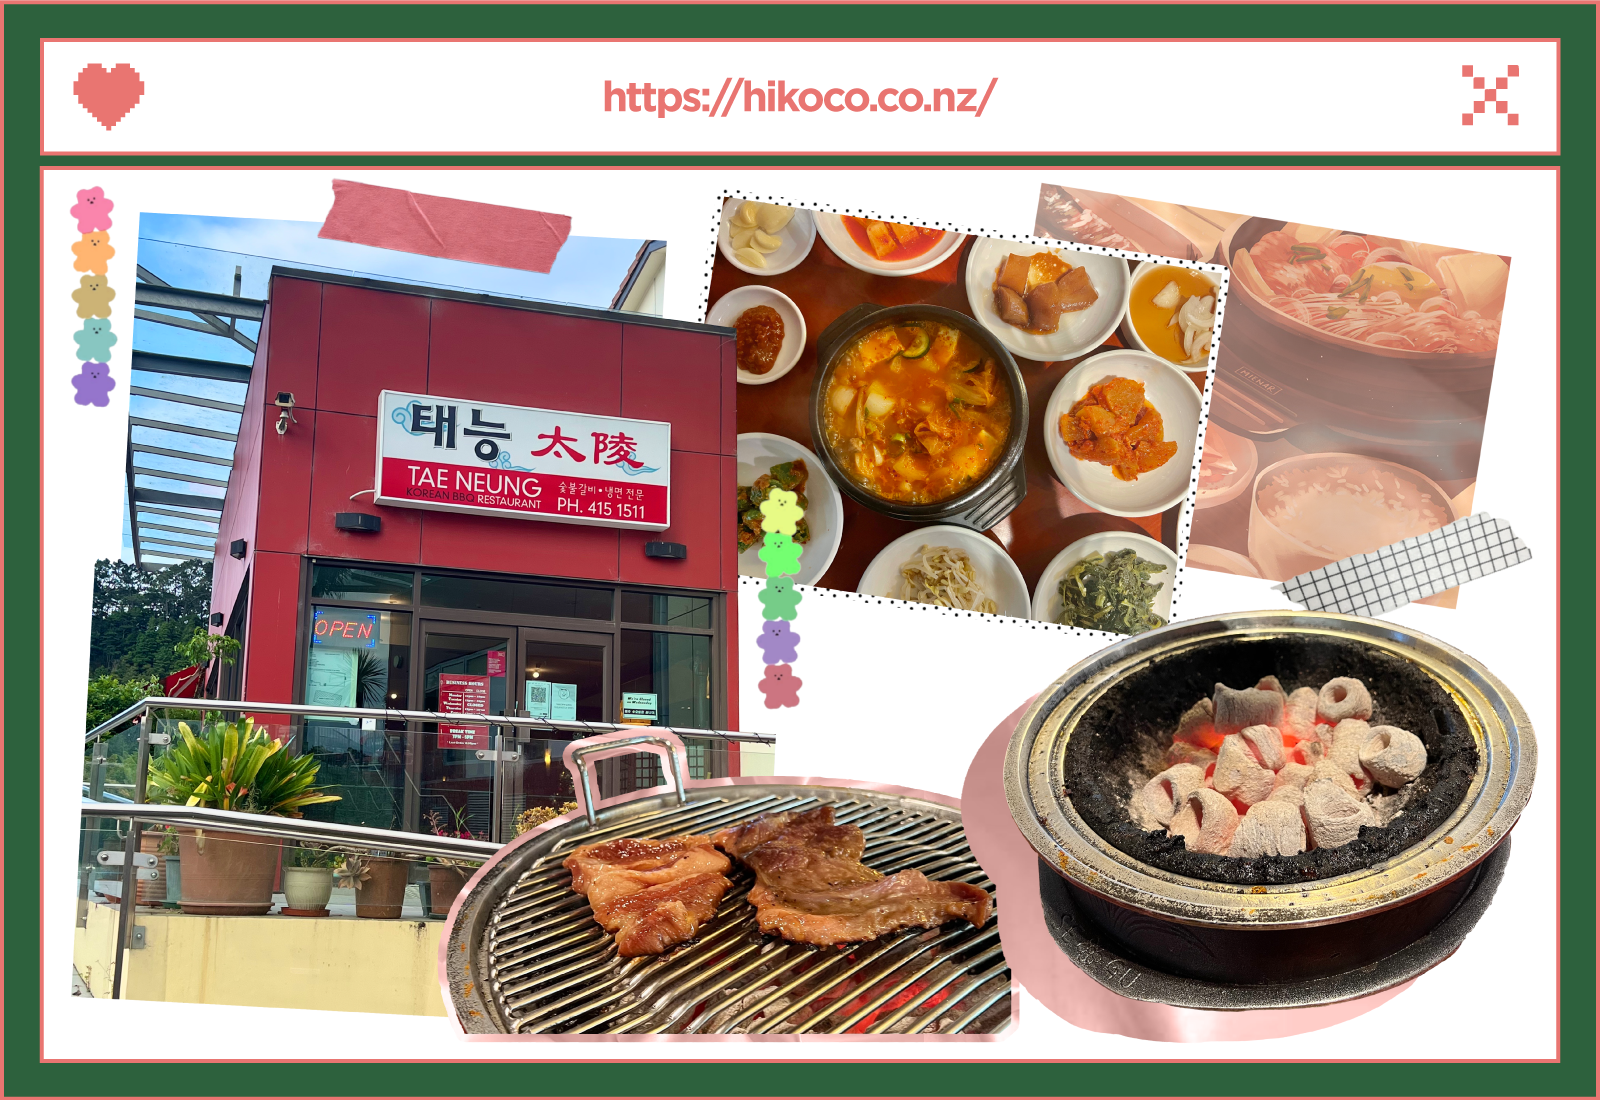 #AucklandEats: Celebrate the Holidays with Korean Soul Food